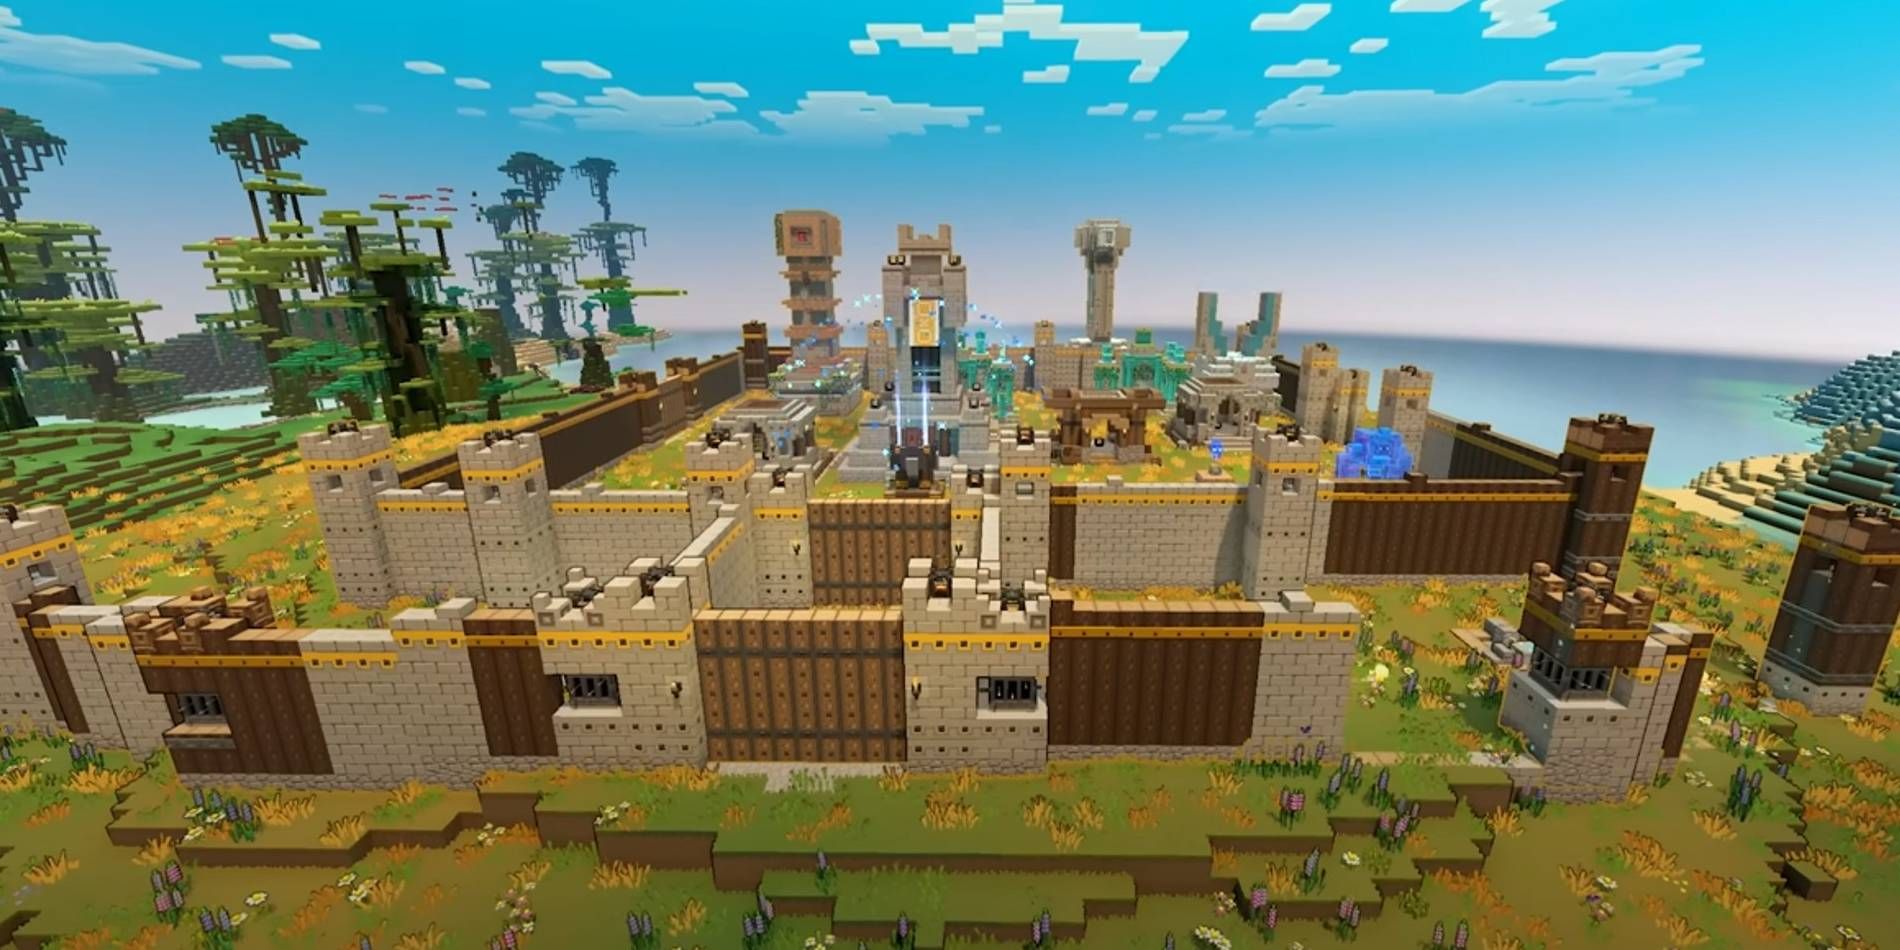 Minecraft Legends Built Base Against Piglin Armies with Multiple Towers, Walls, and Spawners